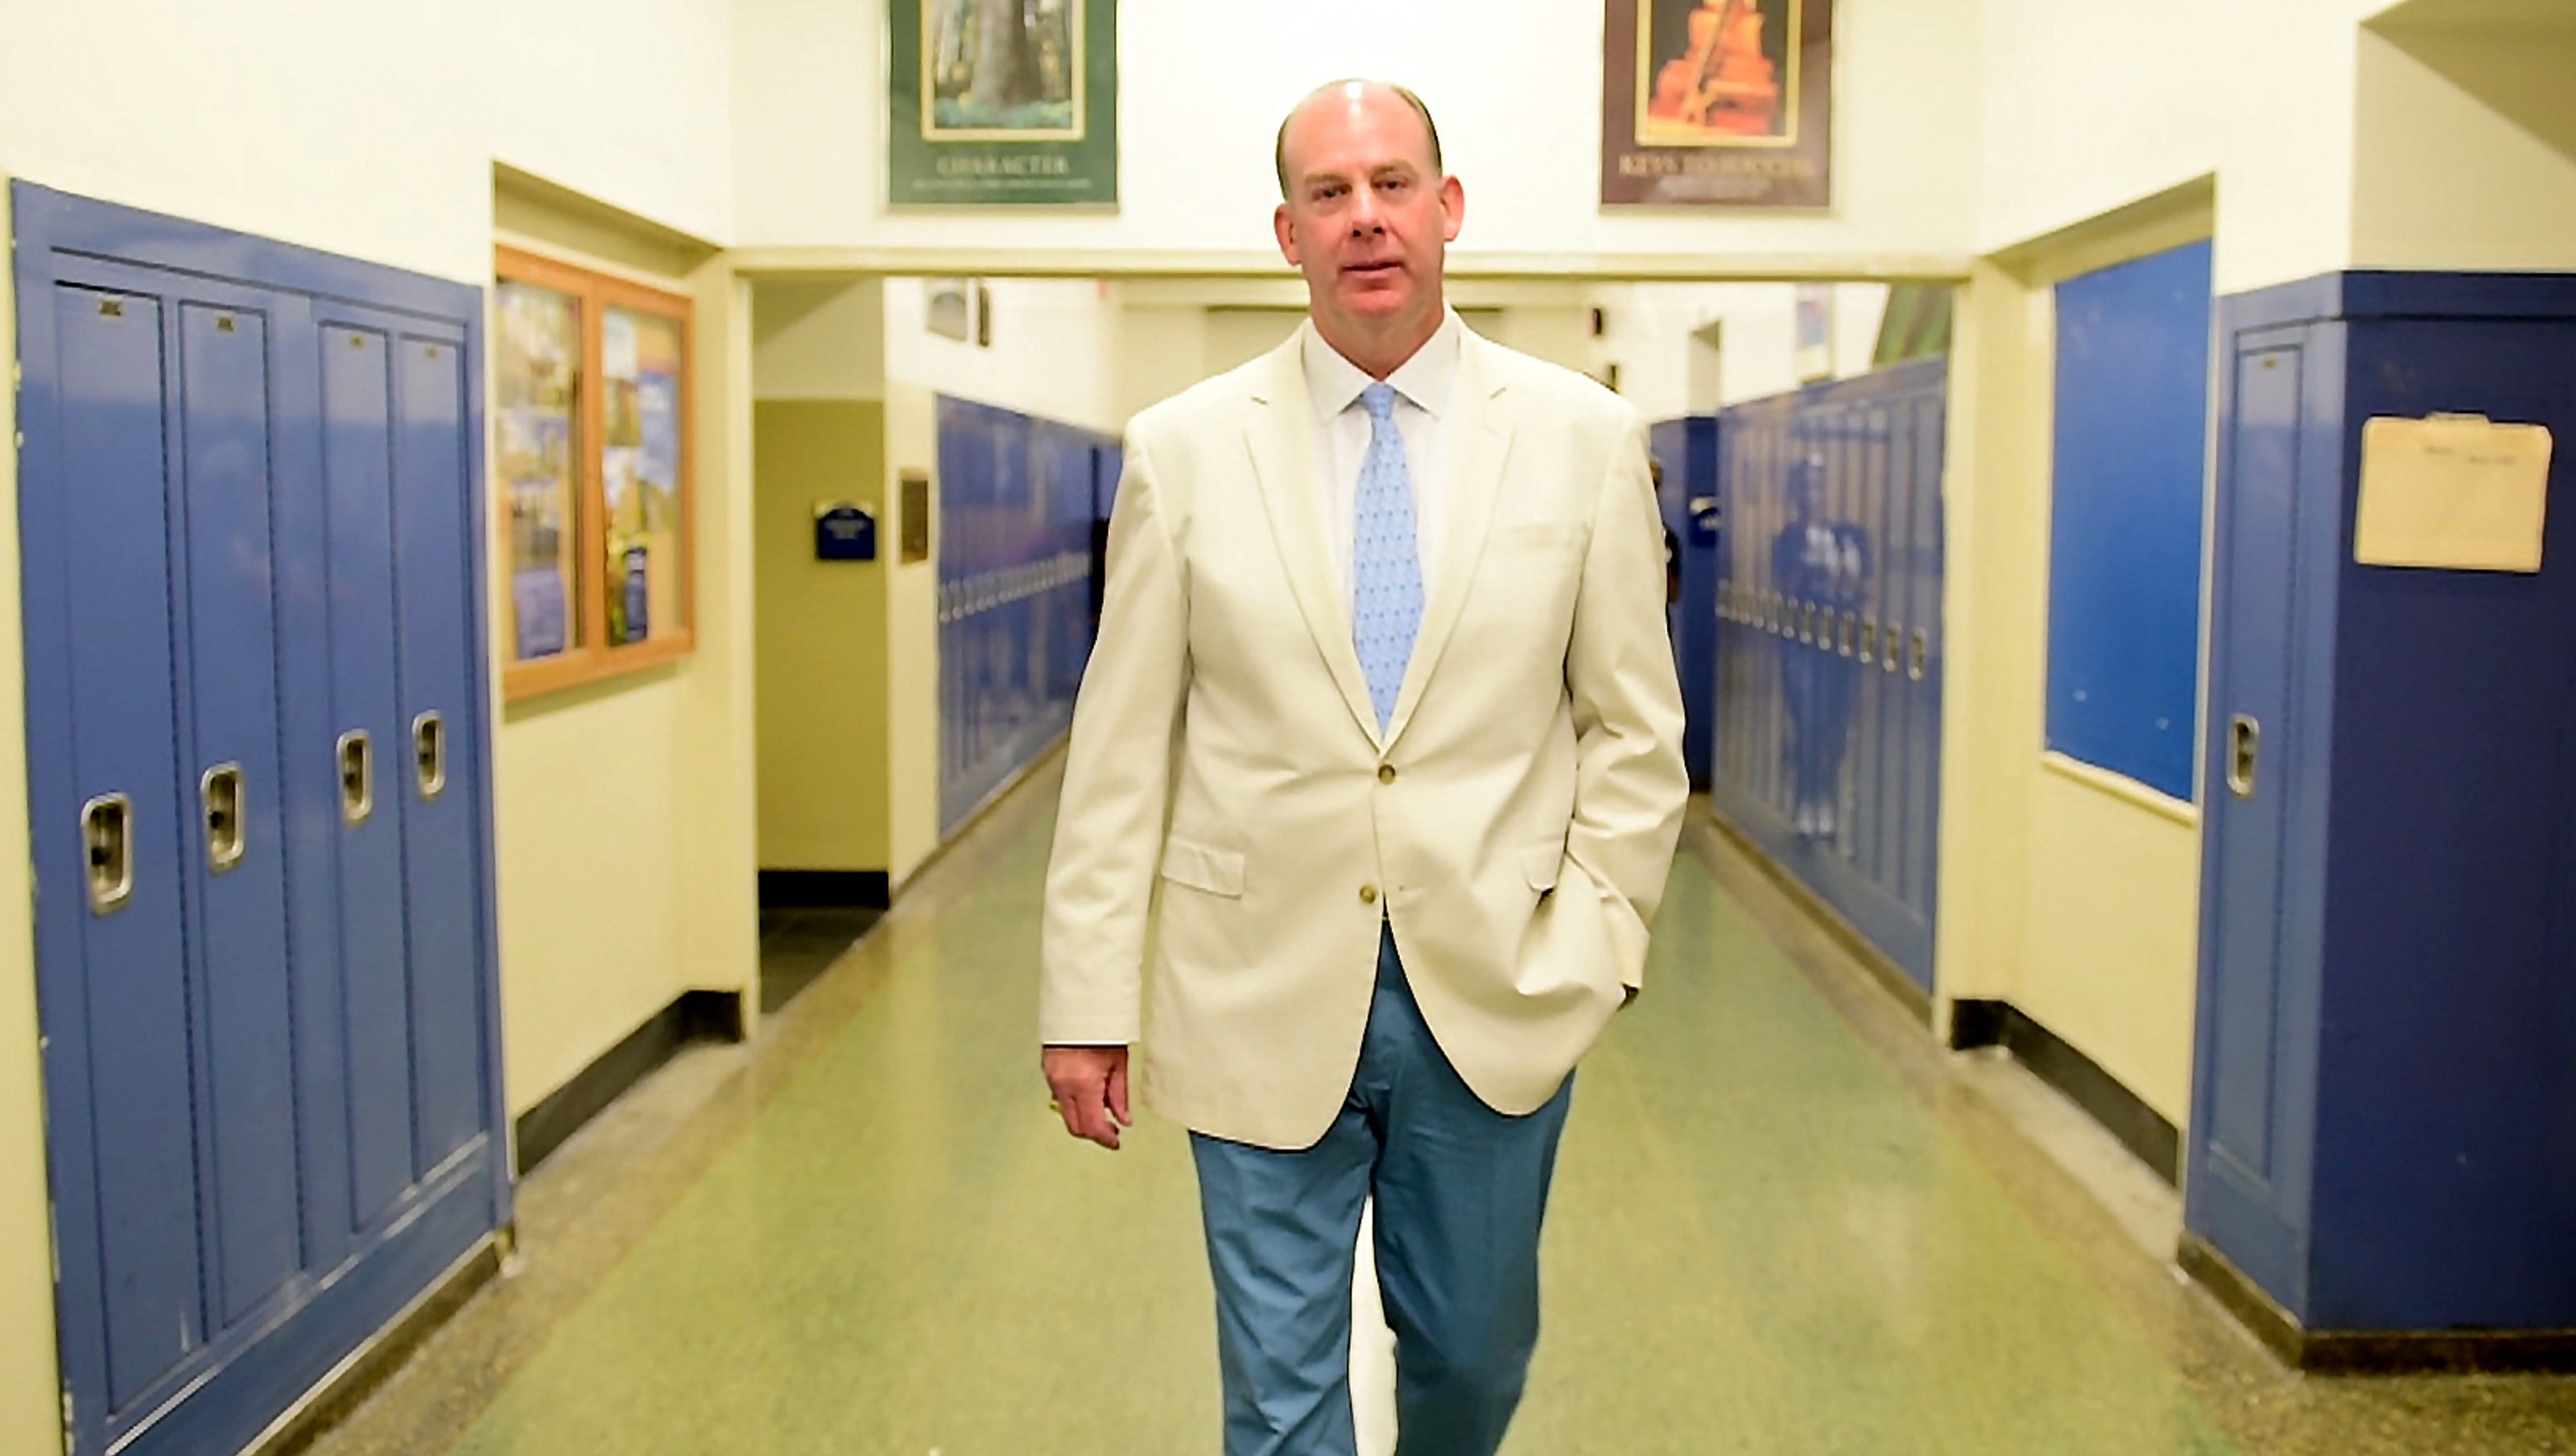 Teaneck High School principal will retire after years of